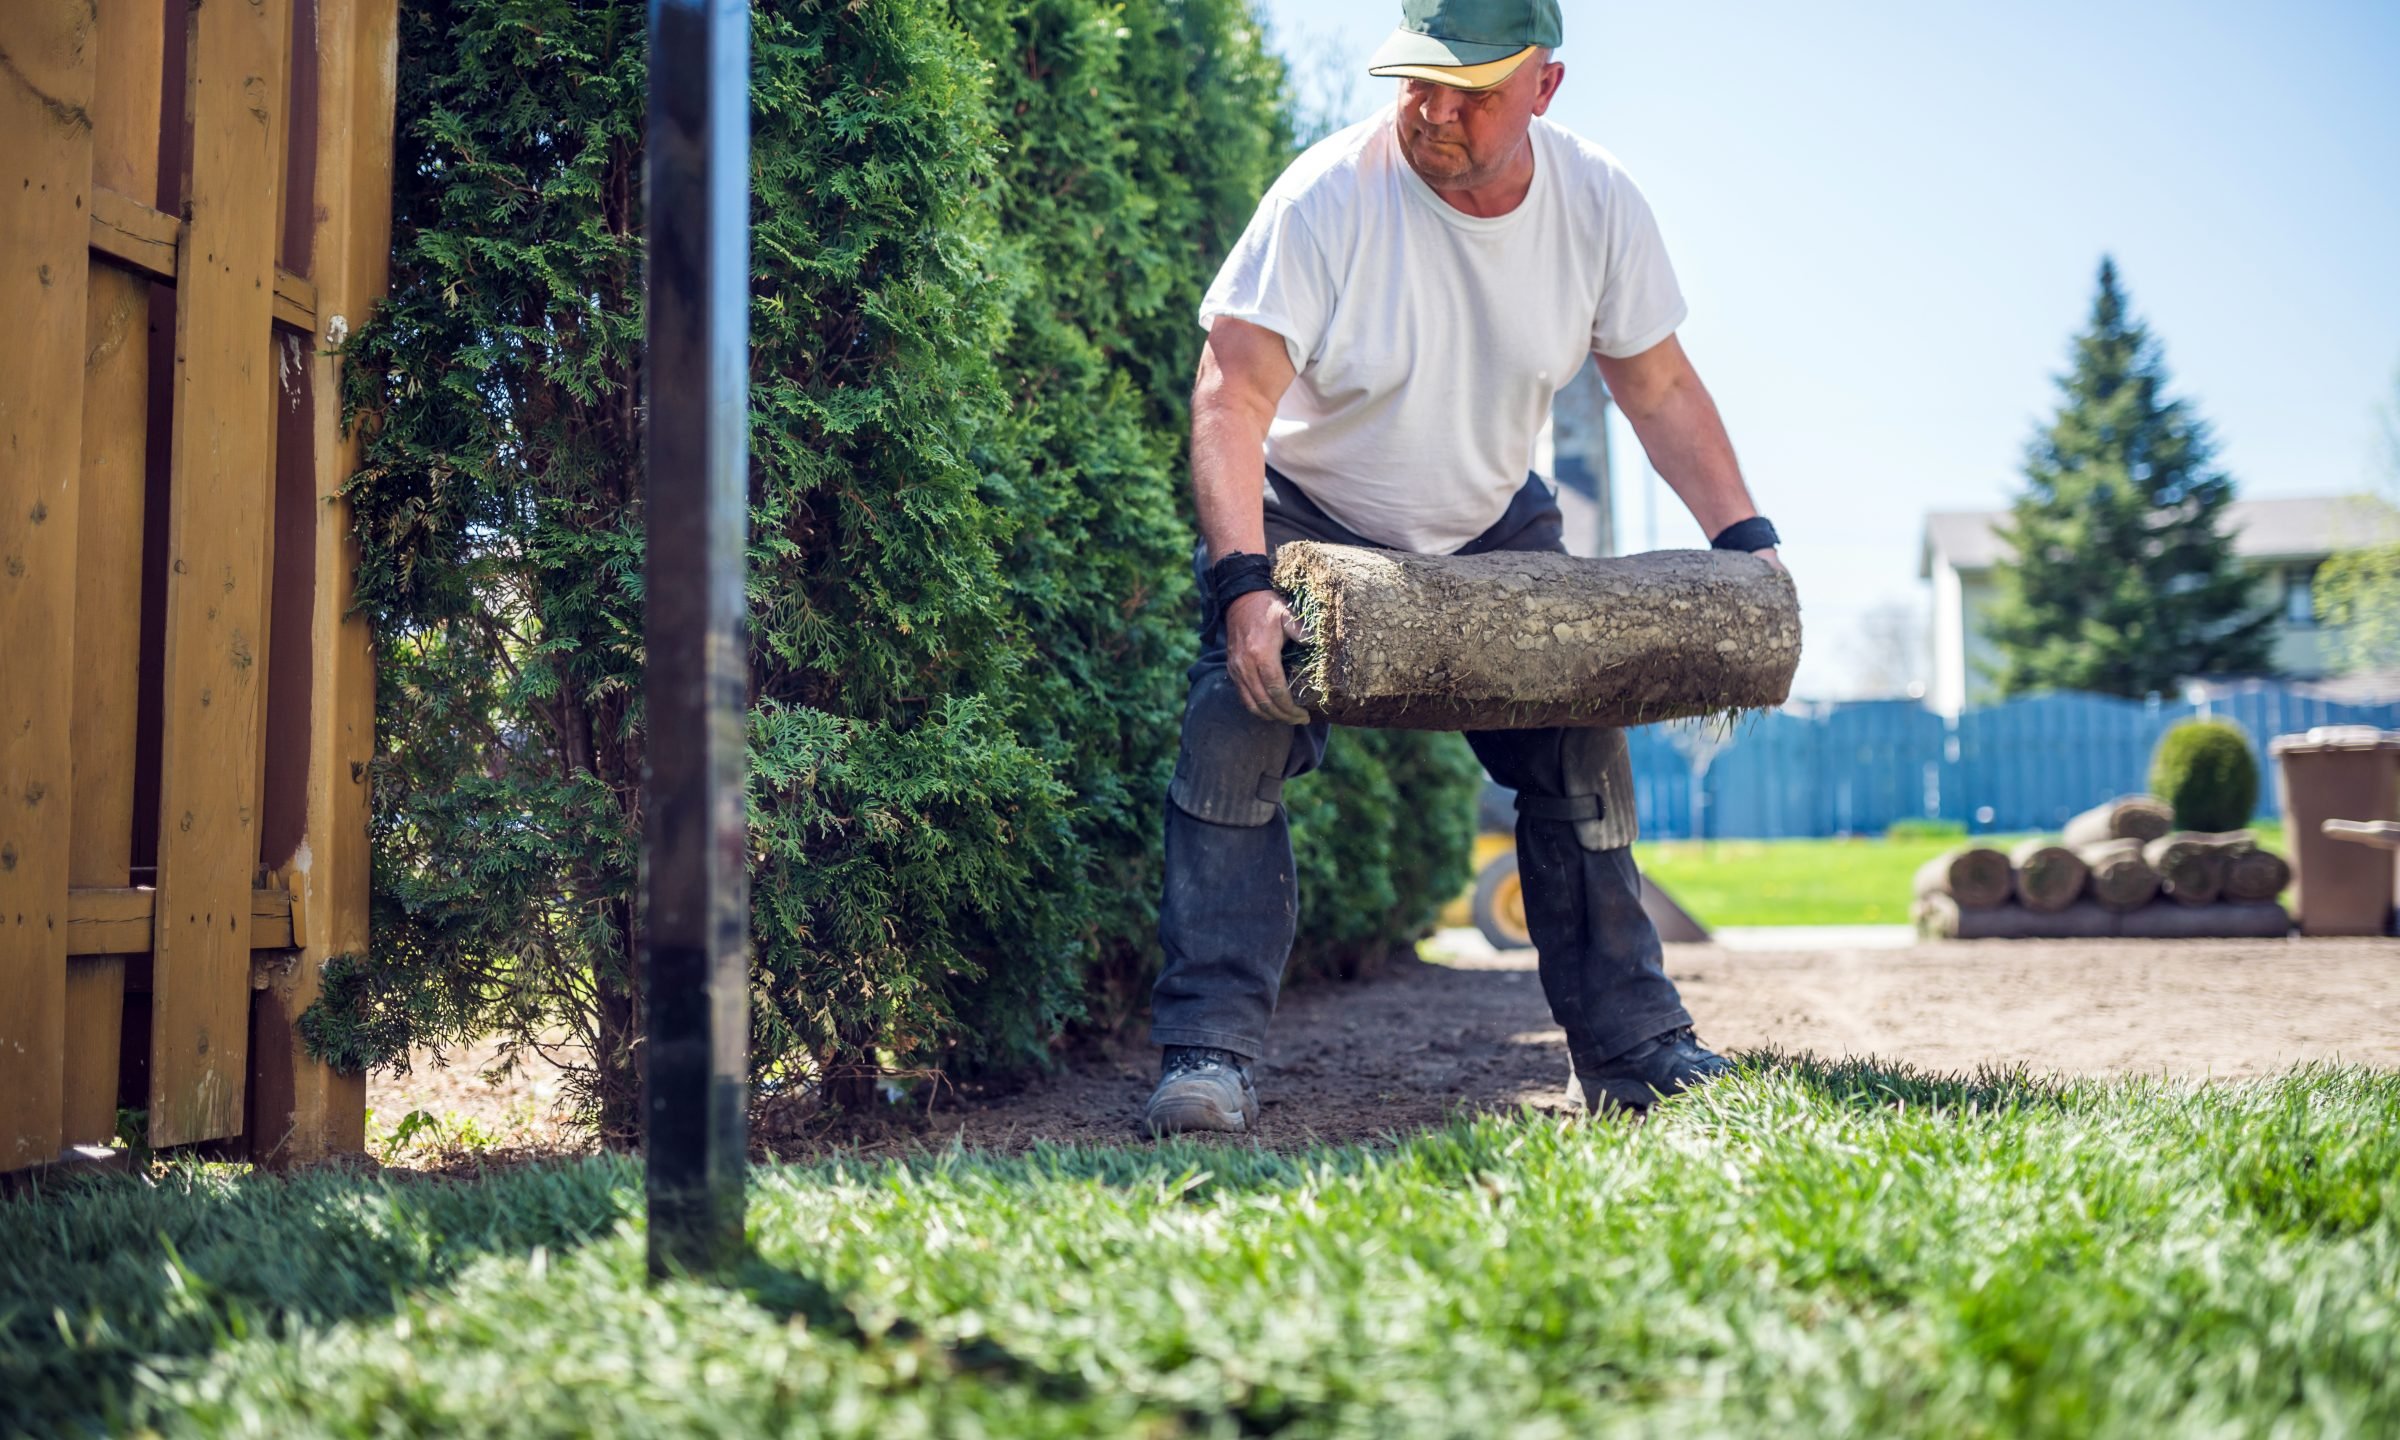 A Landscaping Or Lawn Care Business, How To Get More Customers Landscaping